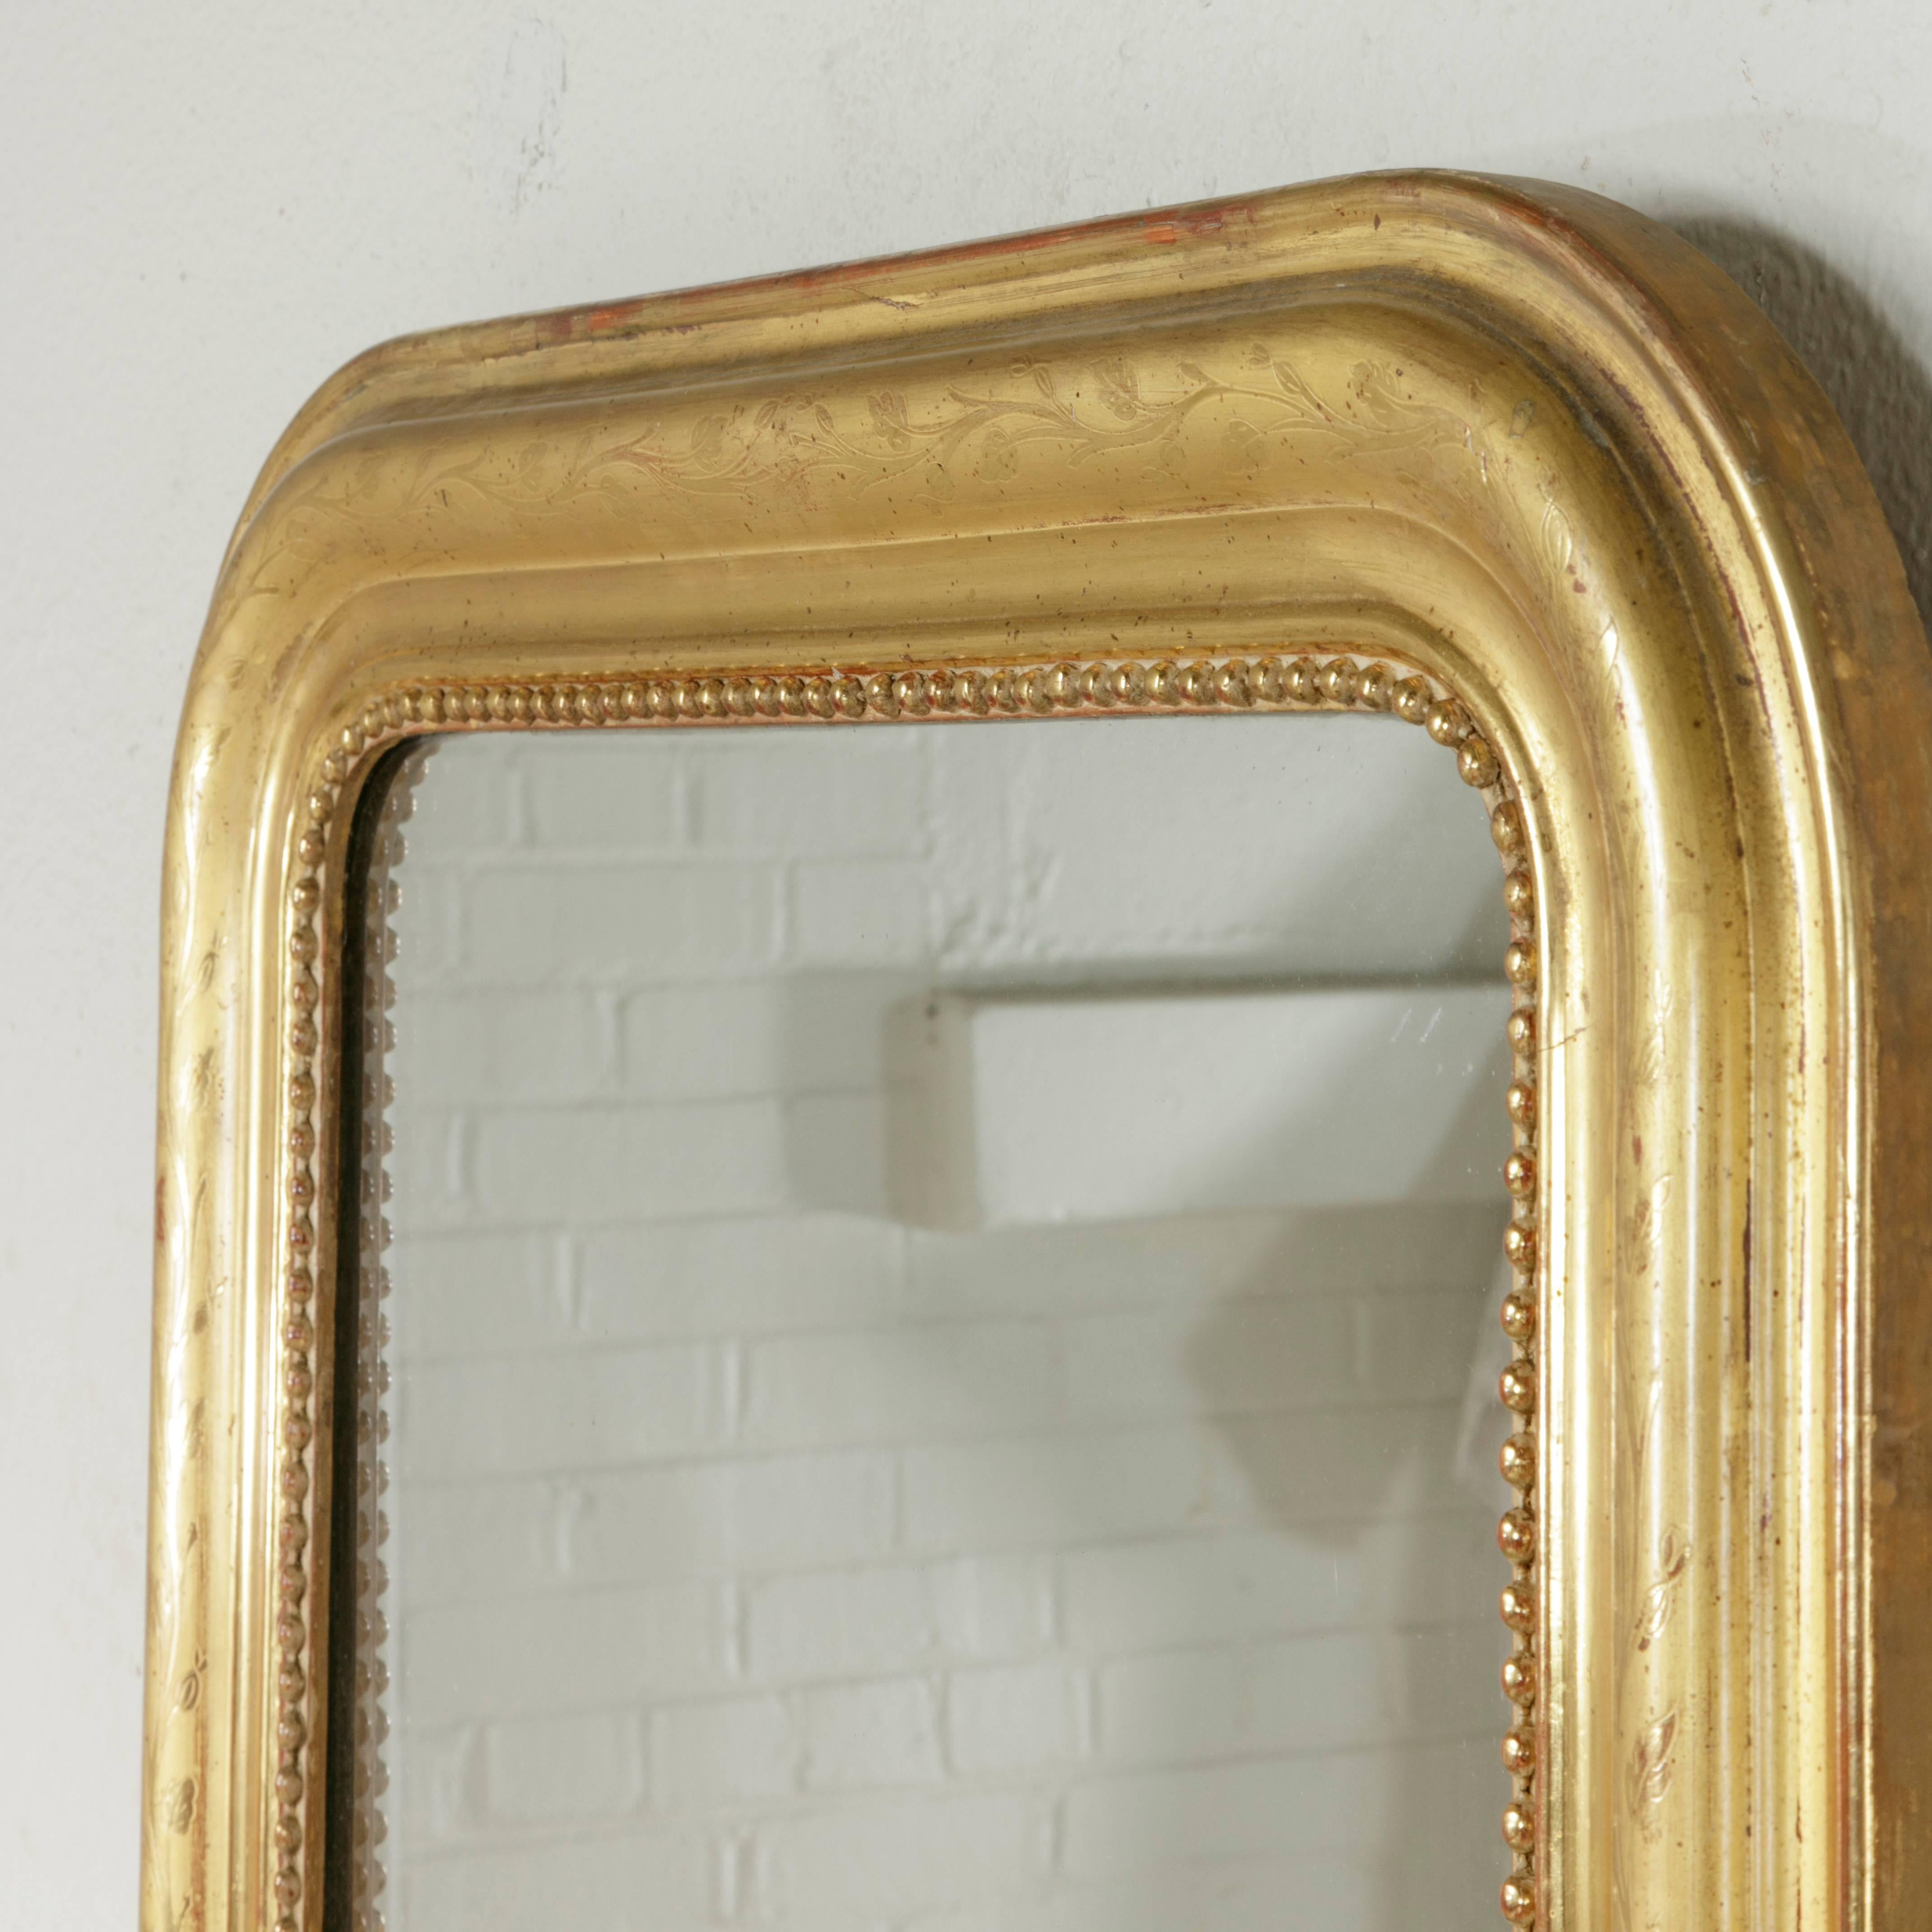 This elegant 19th century French Louis Philippe mirror features a delicately incised leaf and floral pattern on its gold leafed water gilt pillow frame. Its original iron oxide underbody gives it a rich glow. The original mercury glass mirror is